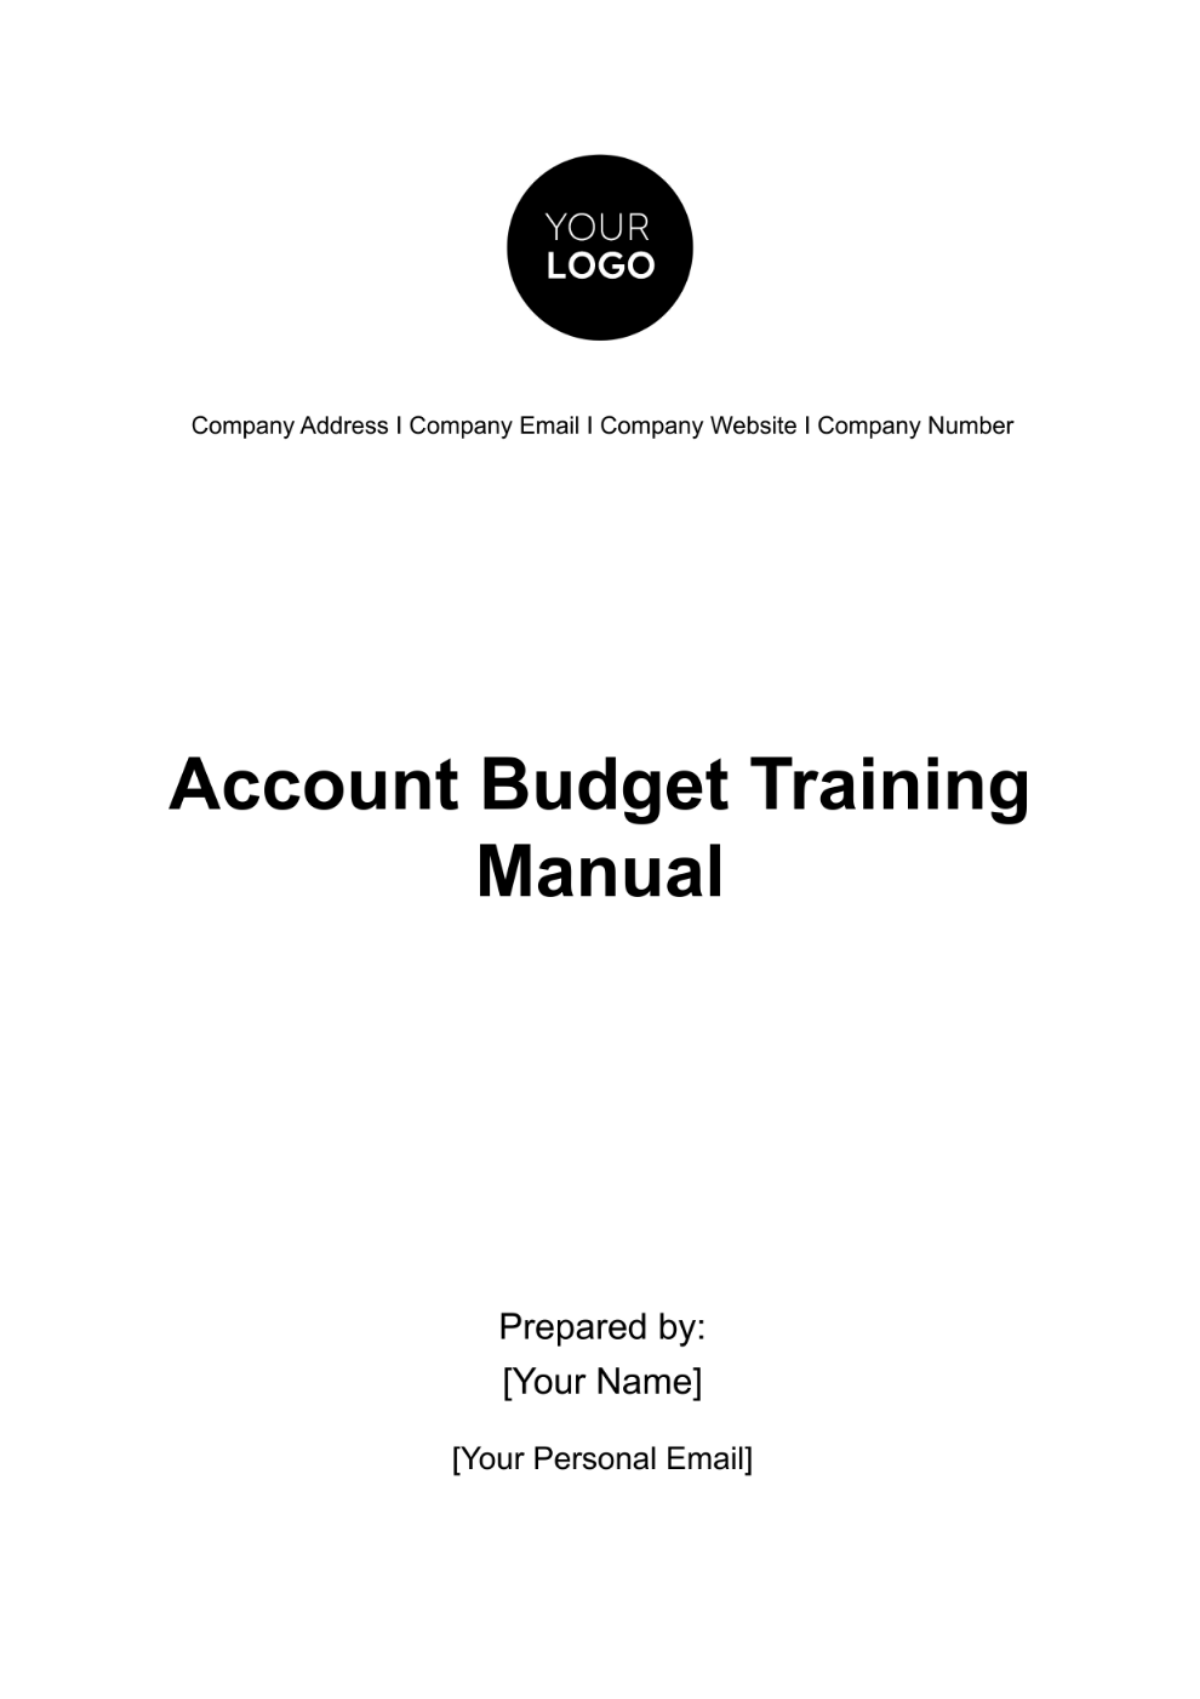 Free Account Budget Training Manual Template